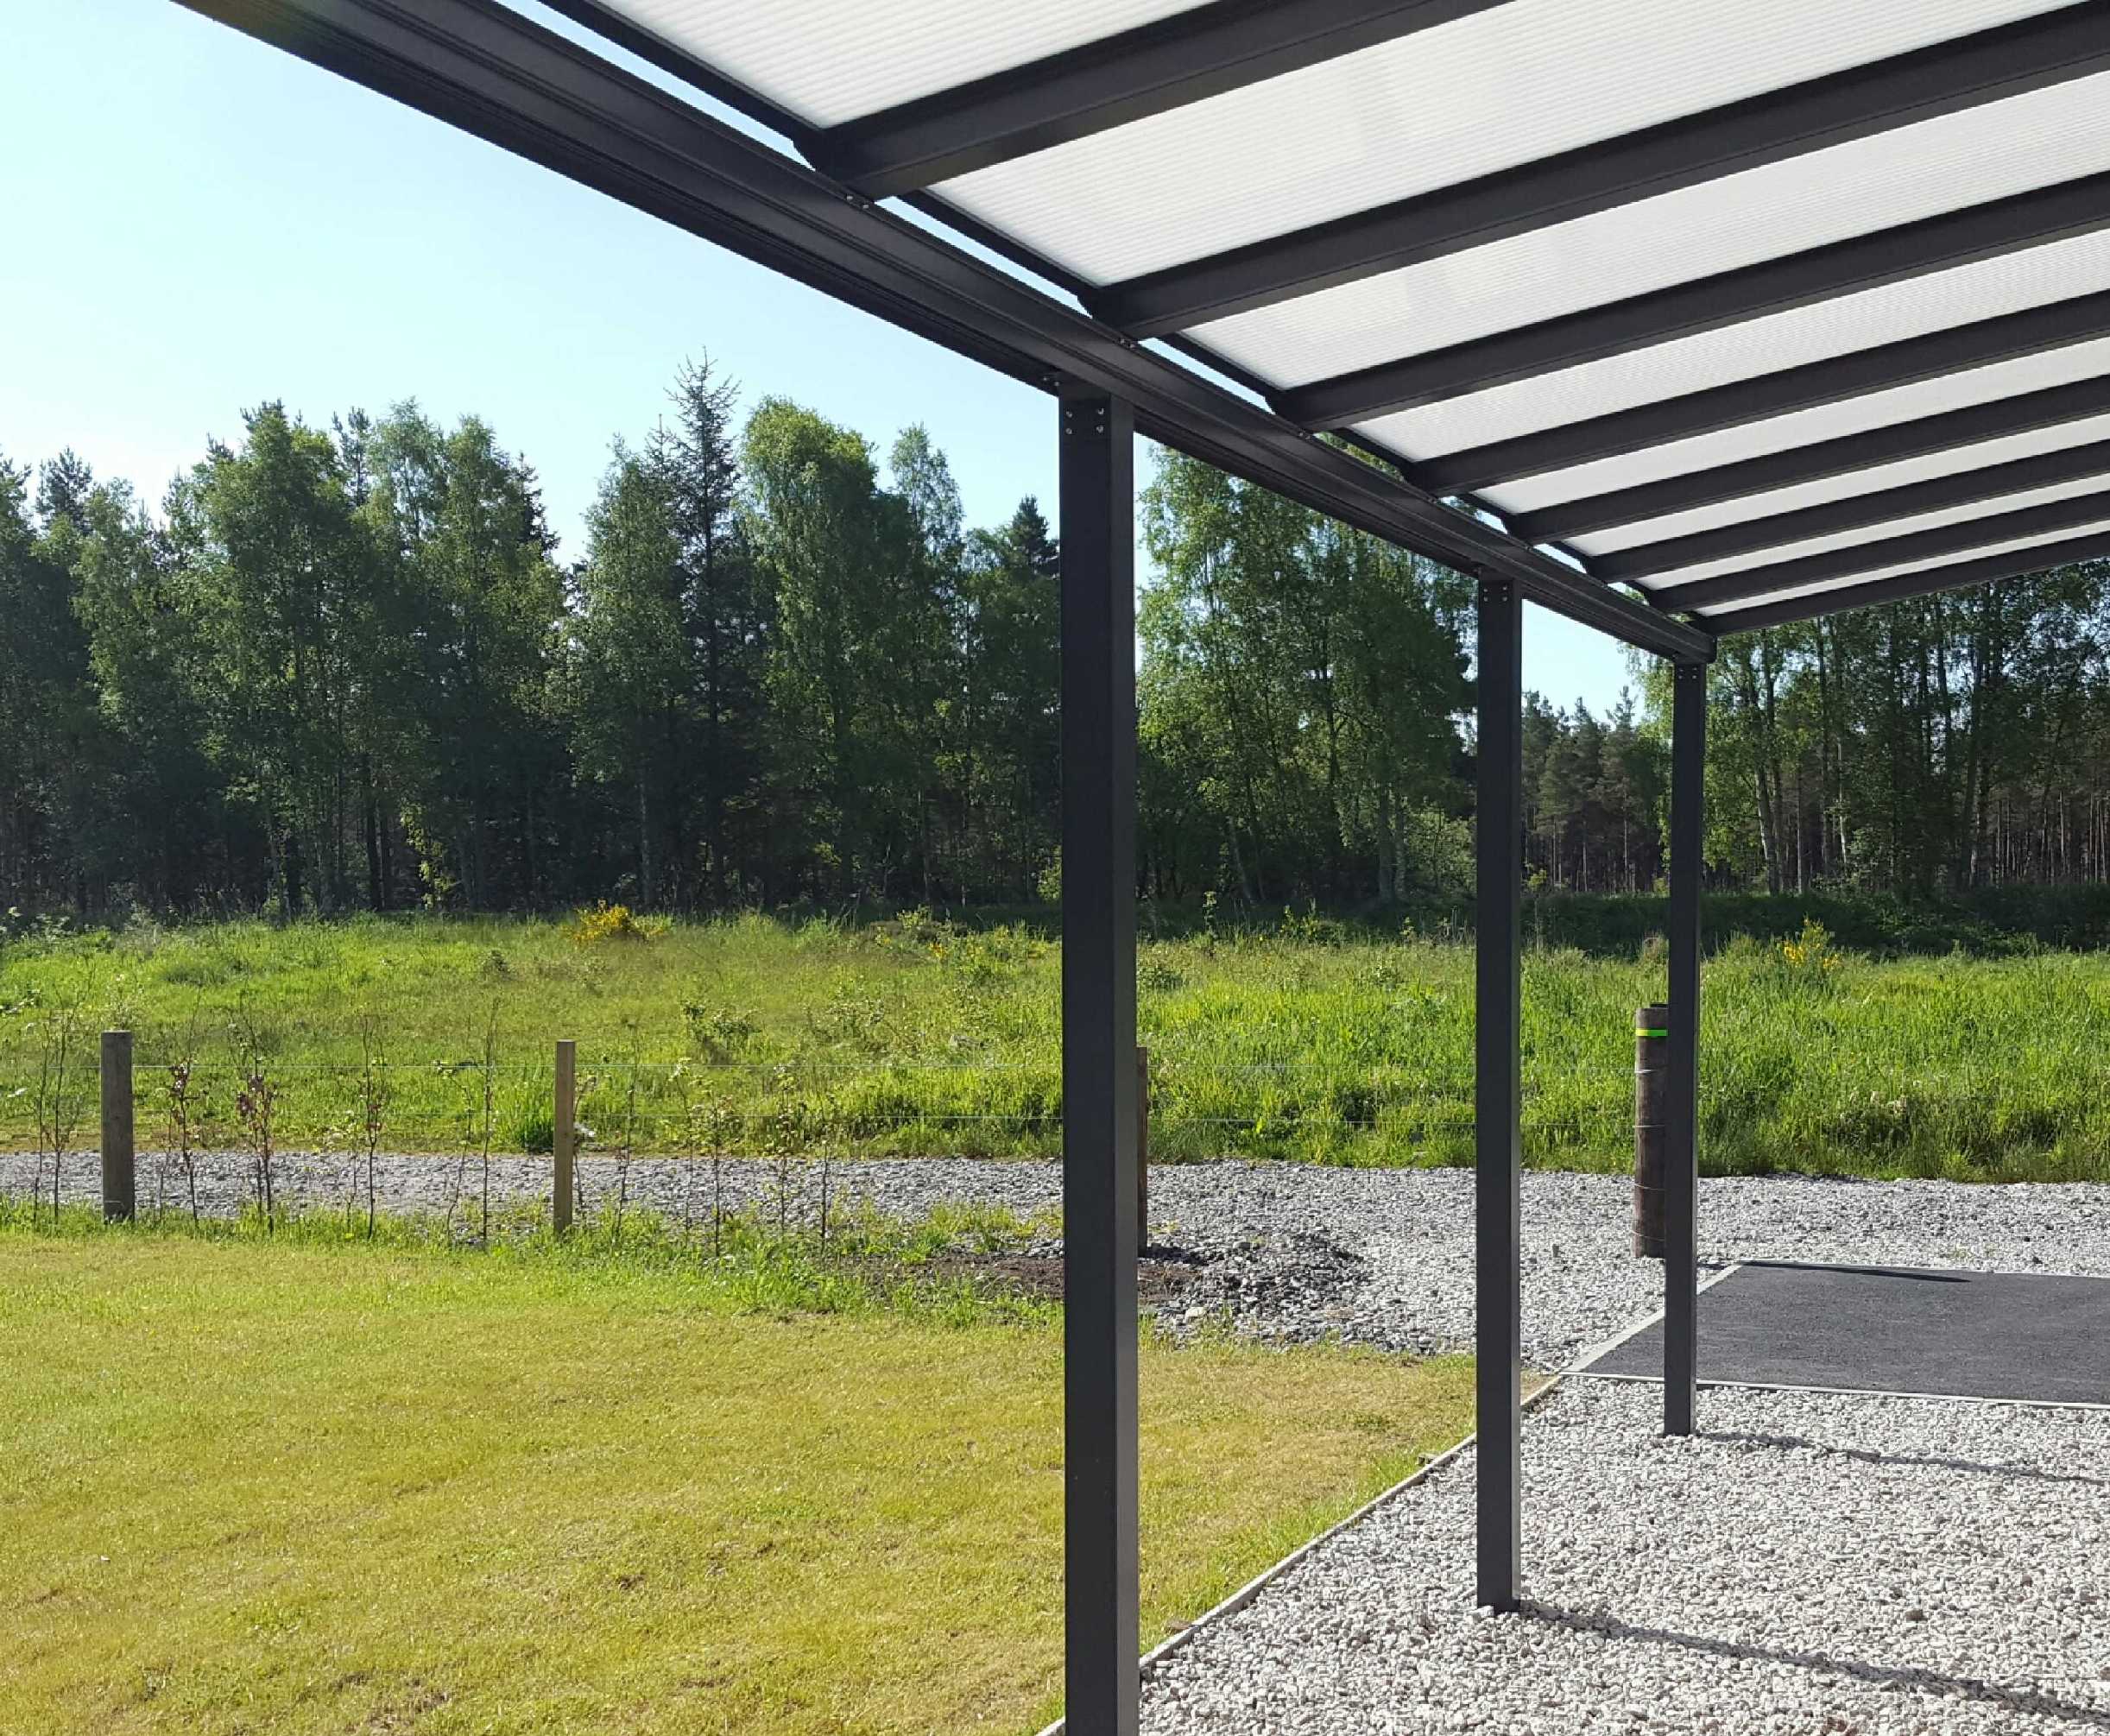 Omega Smart Lean-To Canopy, Anthracite Grey, UNGLAZED for 6mm Glazing - 8.4m (W) x 1.5m (P), (4) Supporting Posts